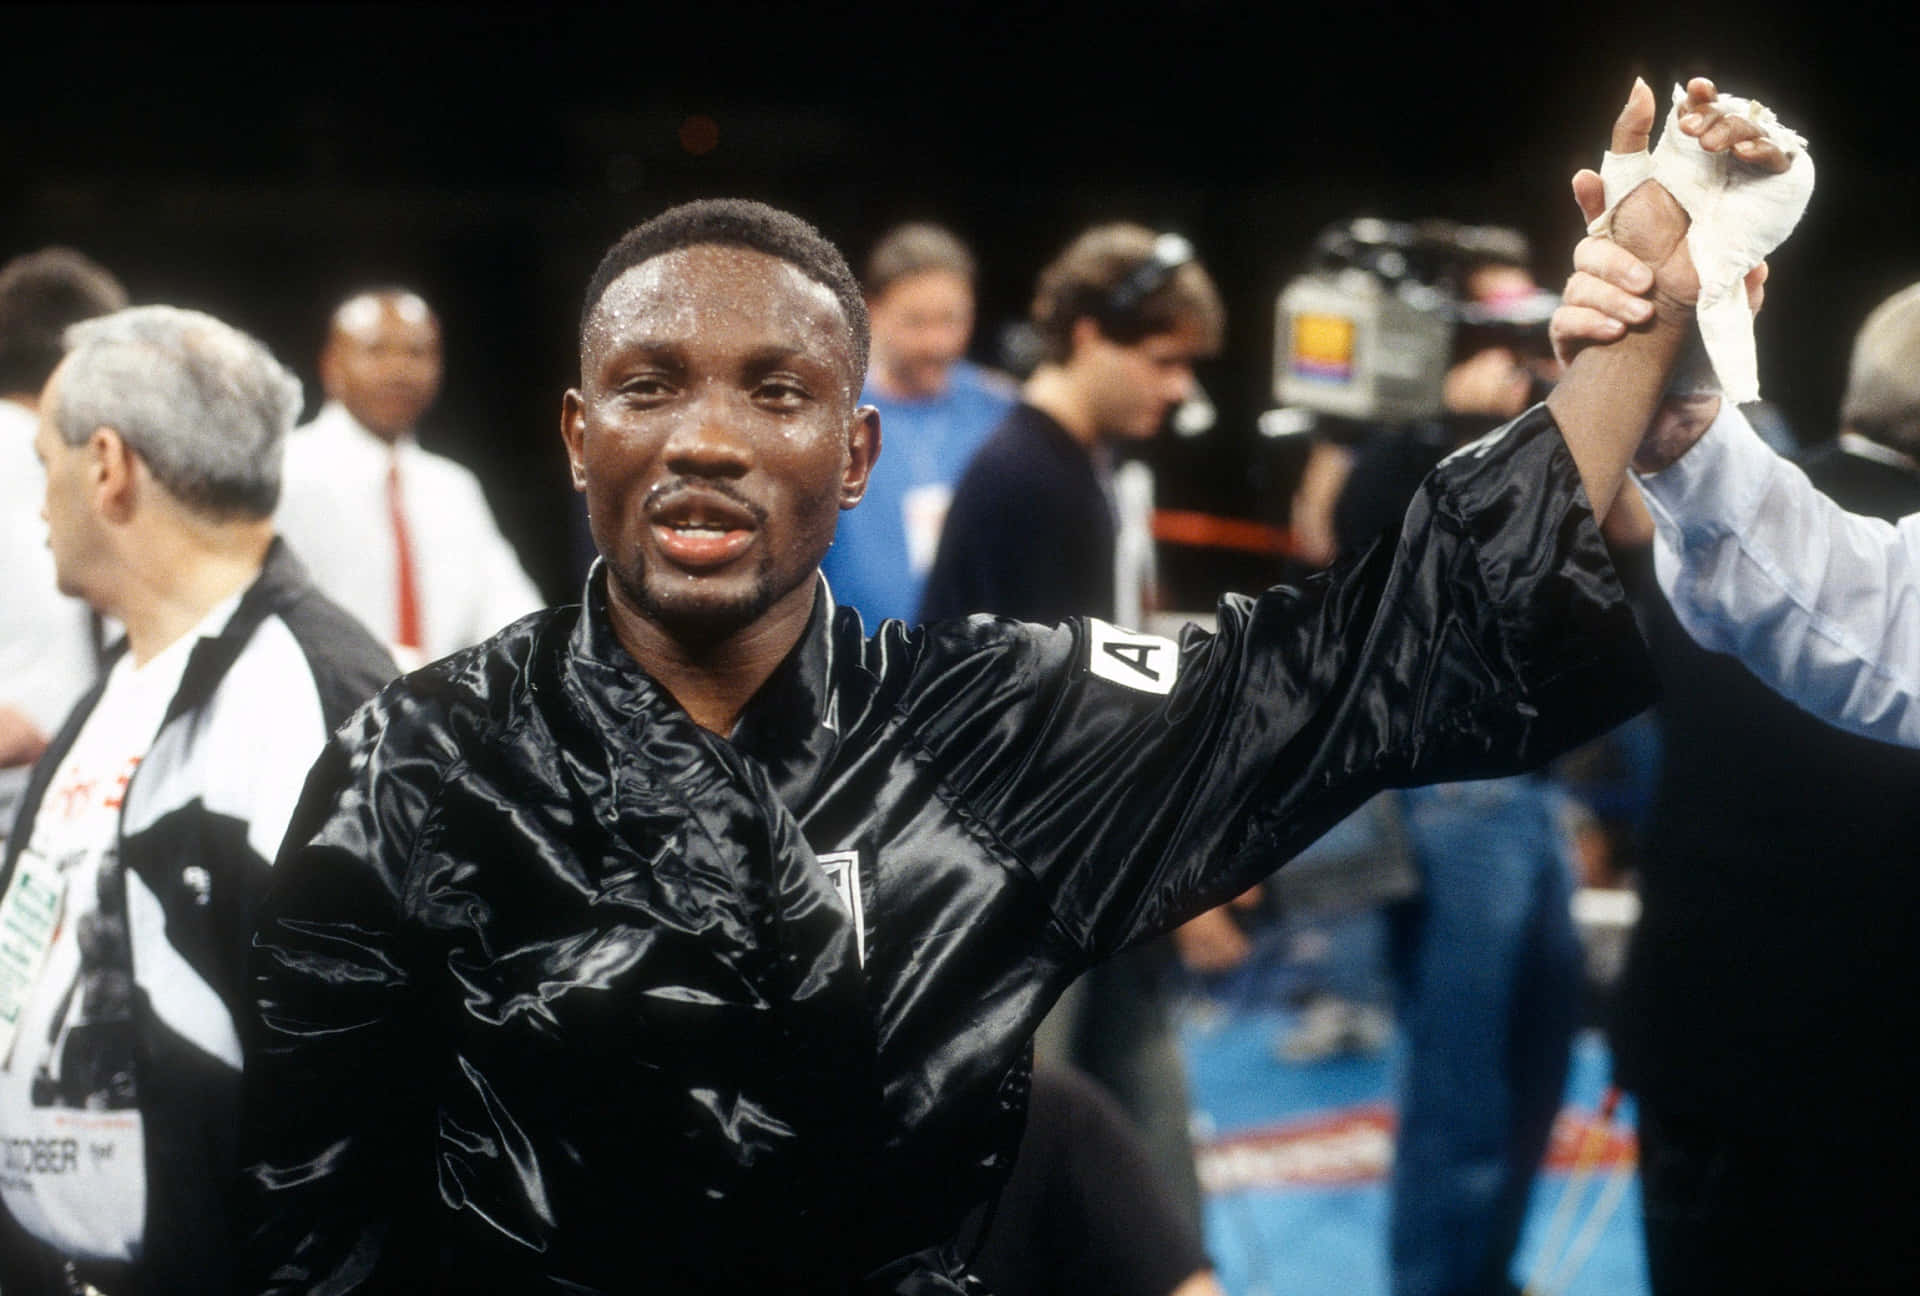 Pernell Whitaker Post-match Wallpaper